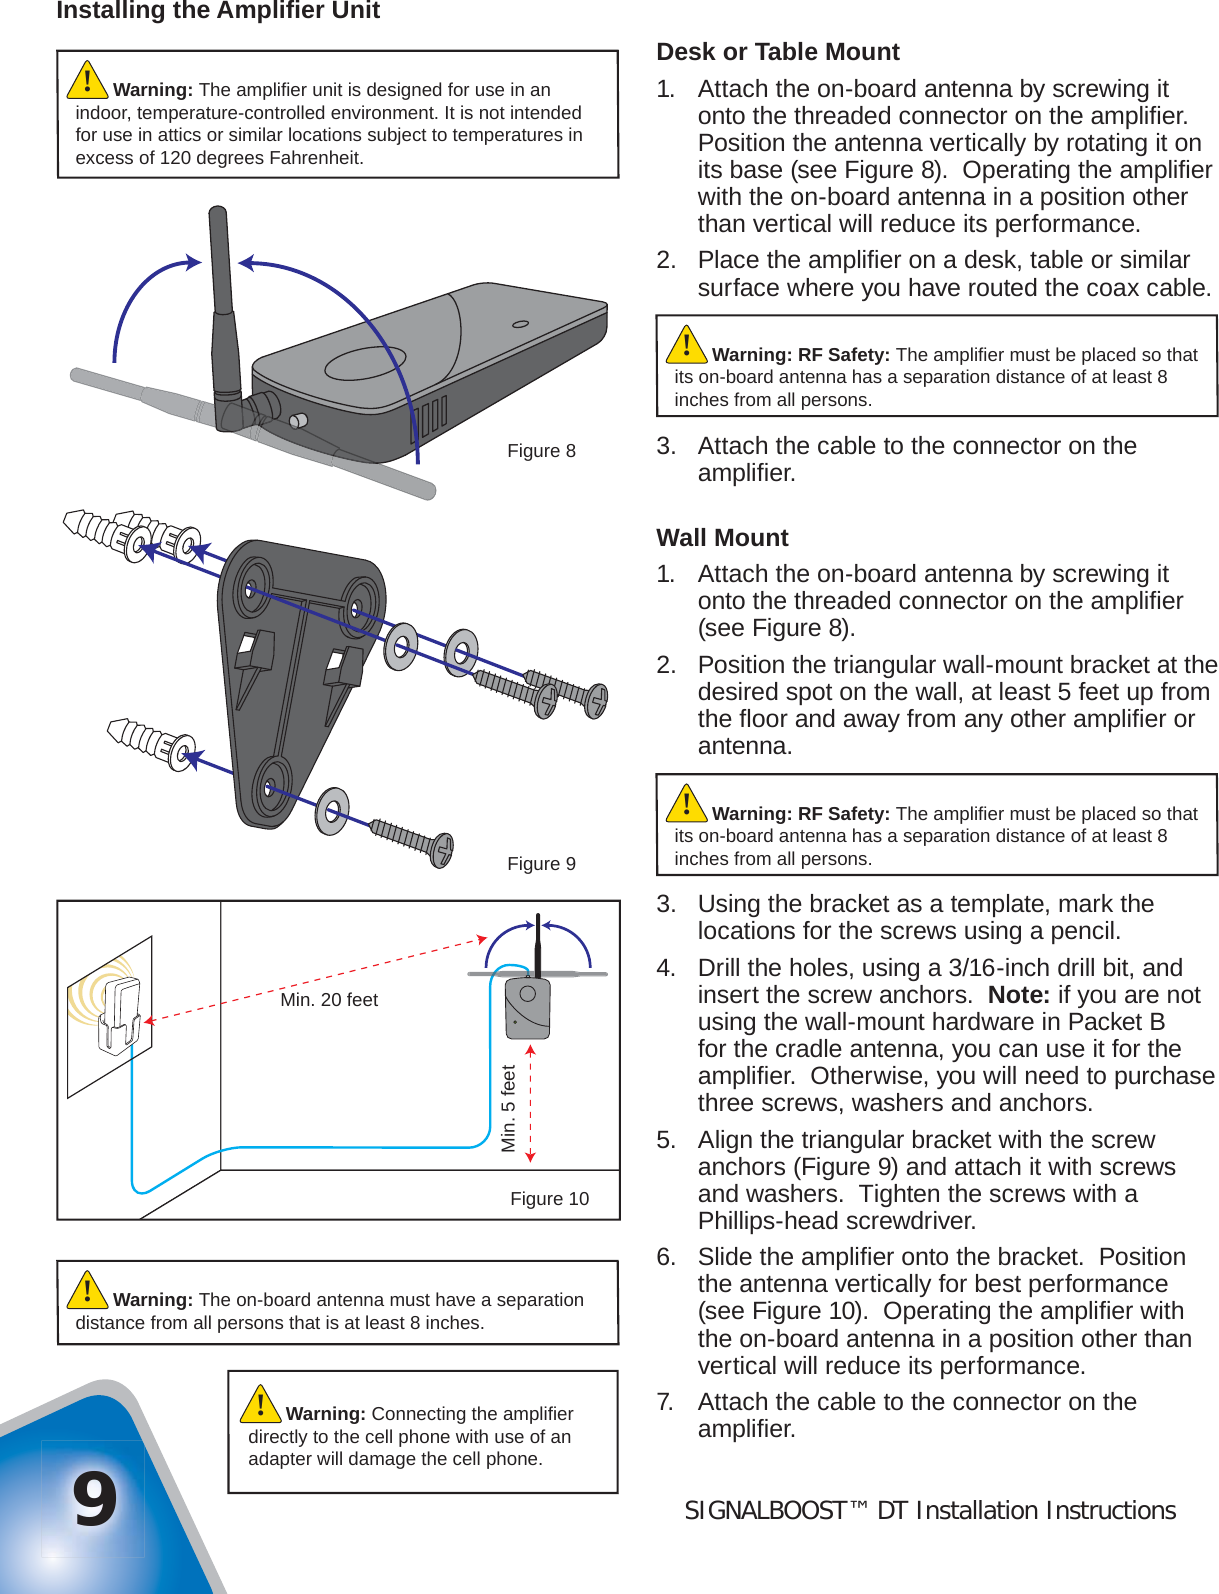 SIGNALBOOST™ DT Installation Instructions9Installing the Ampliﬁ er UnitDesk or Table Mount1.  Attach the on-board antenna by screwing it onto the threaded connector on the ampliﬁ er.  Position the antenna vertically by rotating it on its base (see Figure 8).  Operating the ampliﬁ er with the on-board antenna in a position other than vertical will reduce its performance.2.  Place the ampliﬁ er on a desk, table or similar surface where you have routed the coax cable.3.  Attach the cable to the connector on the ampliﬁ er.Wall Mount1.  Attach the on-board antenna by screwing it onto the threaded connector on the ampliﬁ er (see Figure 8).2.  Position the triangular wall-mount bracket at the desired spot on the wall, at least 5 feet up from the ﬂ oor and away from any other ampliﬁ er or antenna.3.  Using the bracket as a template, mark the locations for the screws using a pencil.4.  Drill the holes, using a 3/16-inch drill bit, and insert the screw anchors.  Note: if you are not using the wall-mount hardware in Packet B for the cradle antenna, you can use it for the ampliﬁ er.  Otherwise, you will need to purchase three screws, washers and anchors.5.  Align the triangular bracket with the screw anchors (Figure 9) and attach it with screws and washers.  Tighten the screws with a Phillips-head screwdriver.6.  Slide the ampliﬁ er onto the bracket.  Position the antenna vertically for best performance (see Figure 10).  Operating the ampliﬁ er with the on-board antenna in a position other than vertical will reduce its performance.7.  Attach the cable to the connector on the ampliﬁ er.Warning: The on-board antenna must have a separation distance from all persons that is at least 8 inches.!Warning: Connecting the ampliﬁ er directly to the cell phone with use of an adapter will damage the cell phone.!Figure 9Min. 20 feetMin. 5 feetFigure 10Figure 8Warning: RF Safety: The ampliﬁ er must be placed so that its on-board antenna has a separation distance of at least 8 inches from all persons.!Warning: The ampliﬁ er unit is designed for use in an indoor, temperature-controlled environment. It is not intended for use in attics or similar locations subject to temperatures in excess of 120 degrees Fahrenheit.!Warning: RF Safety: The ampliﬁ er must be placed so that its on-board antenna has a separation distance of at least 8 inches from all persons.!